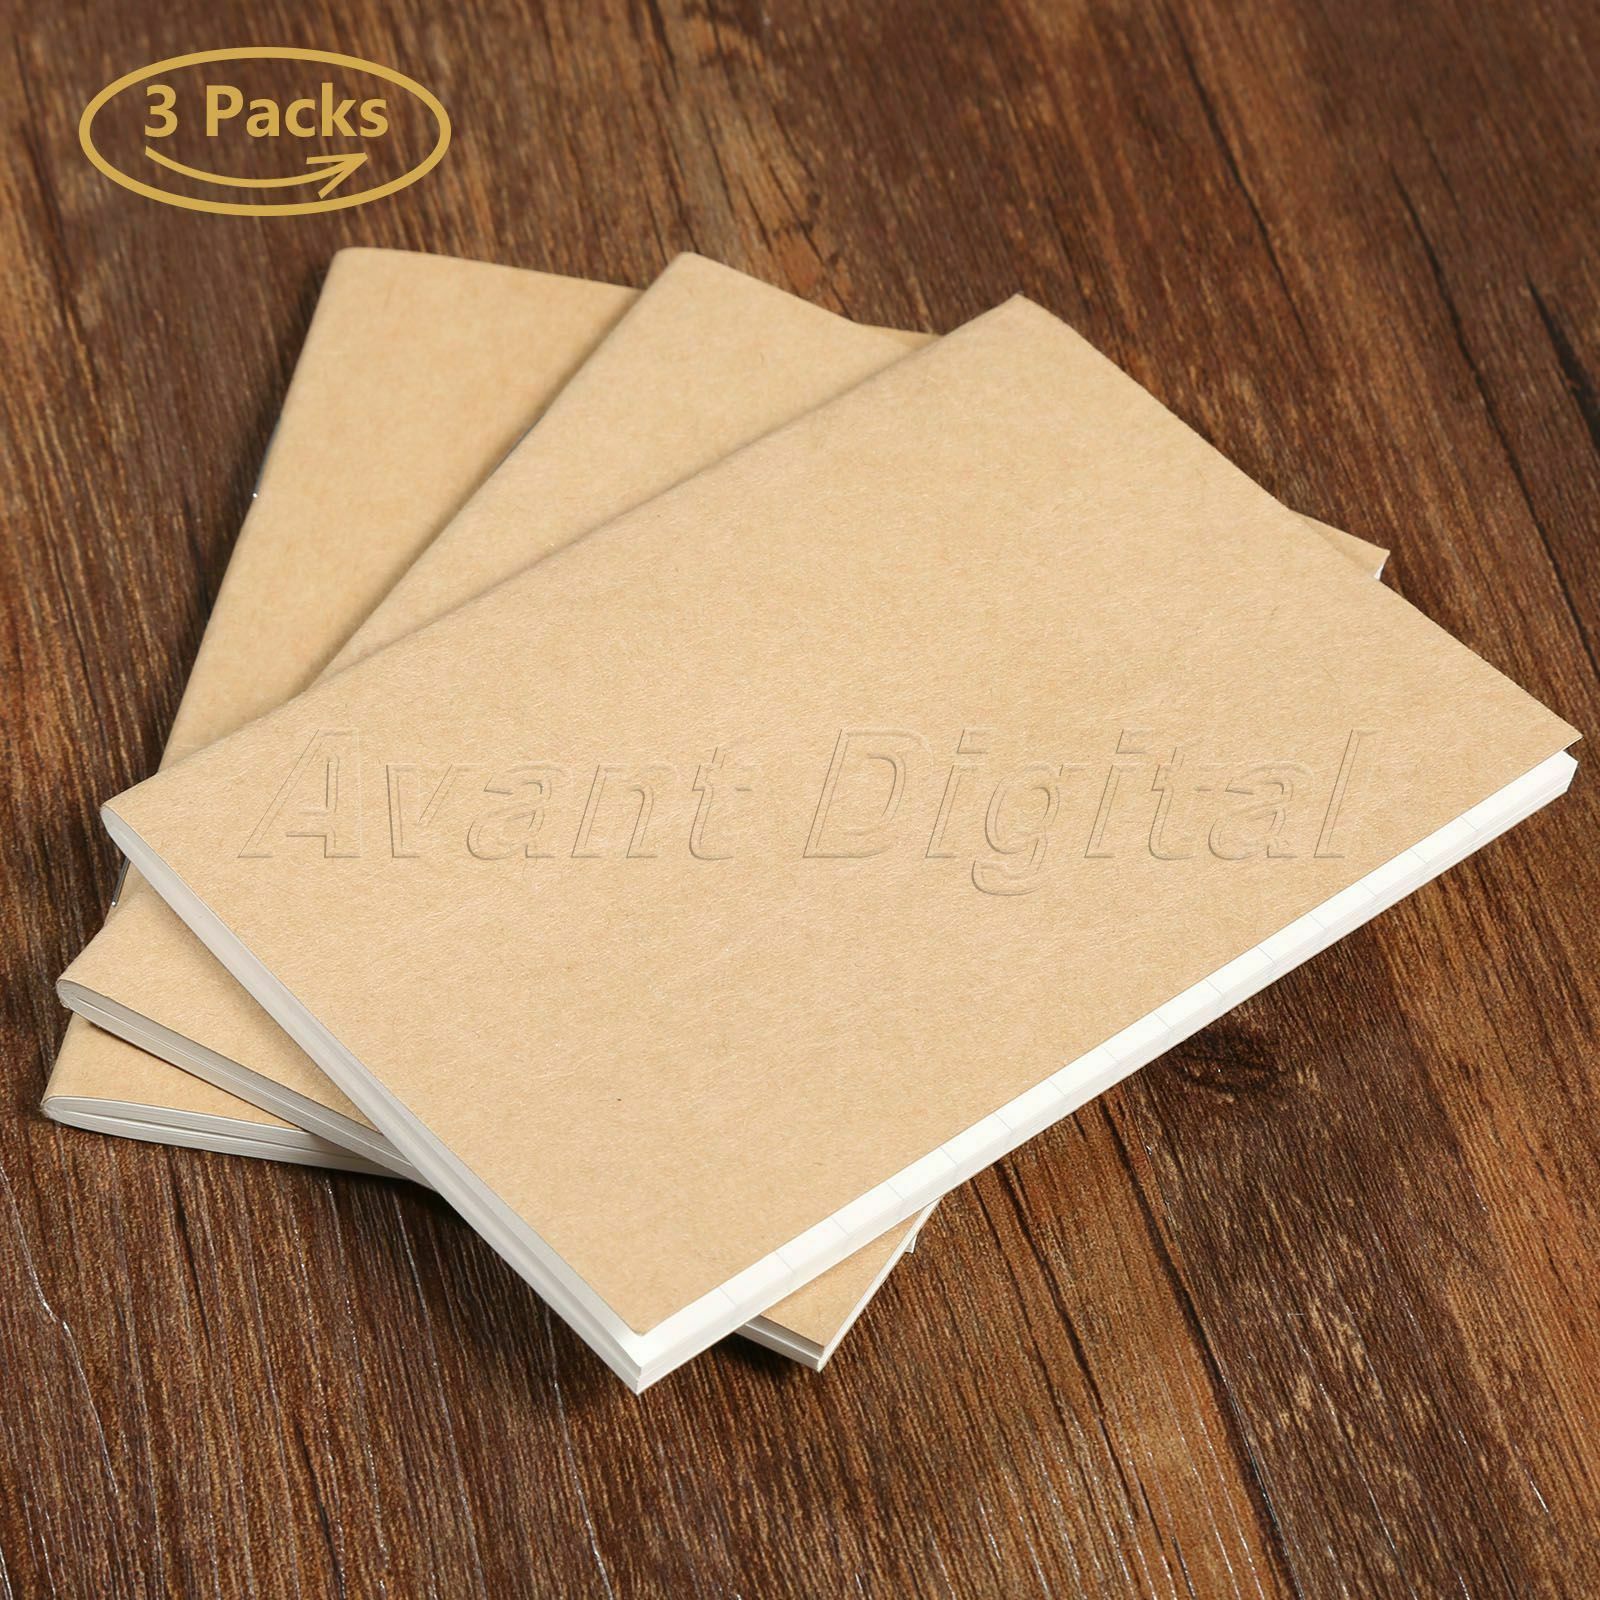 3 Set Blank Paper Refill For Travel Notepad Passport Notebook Diary Memo Journal